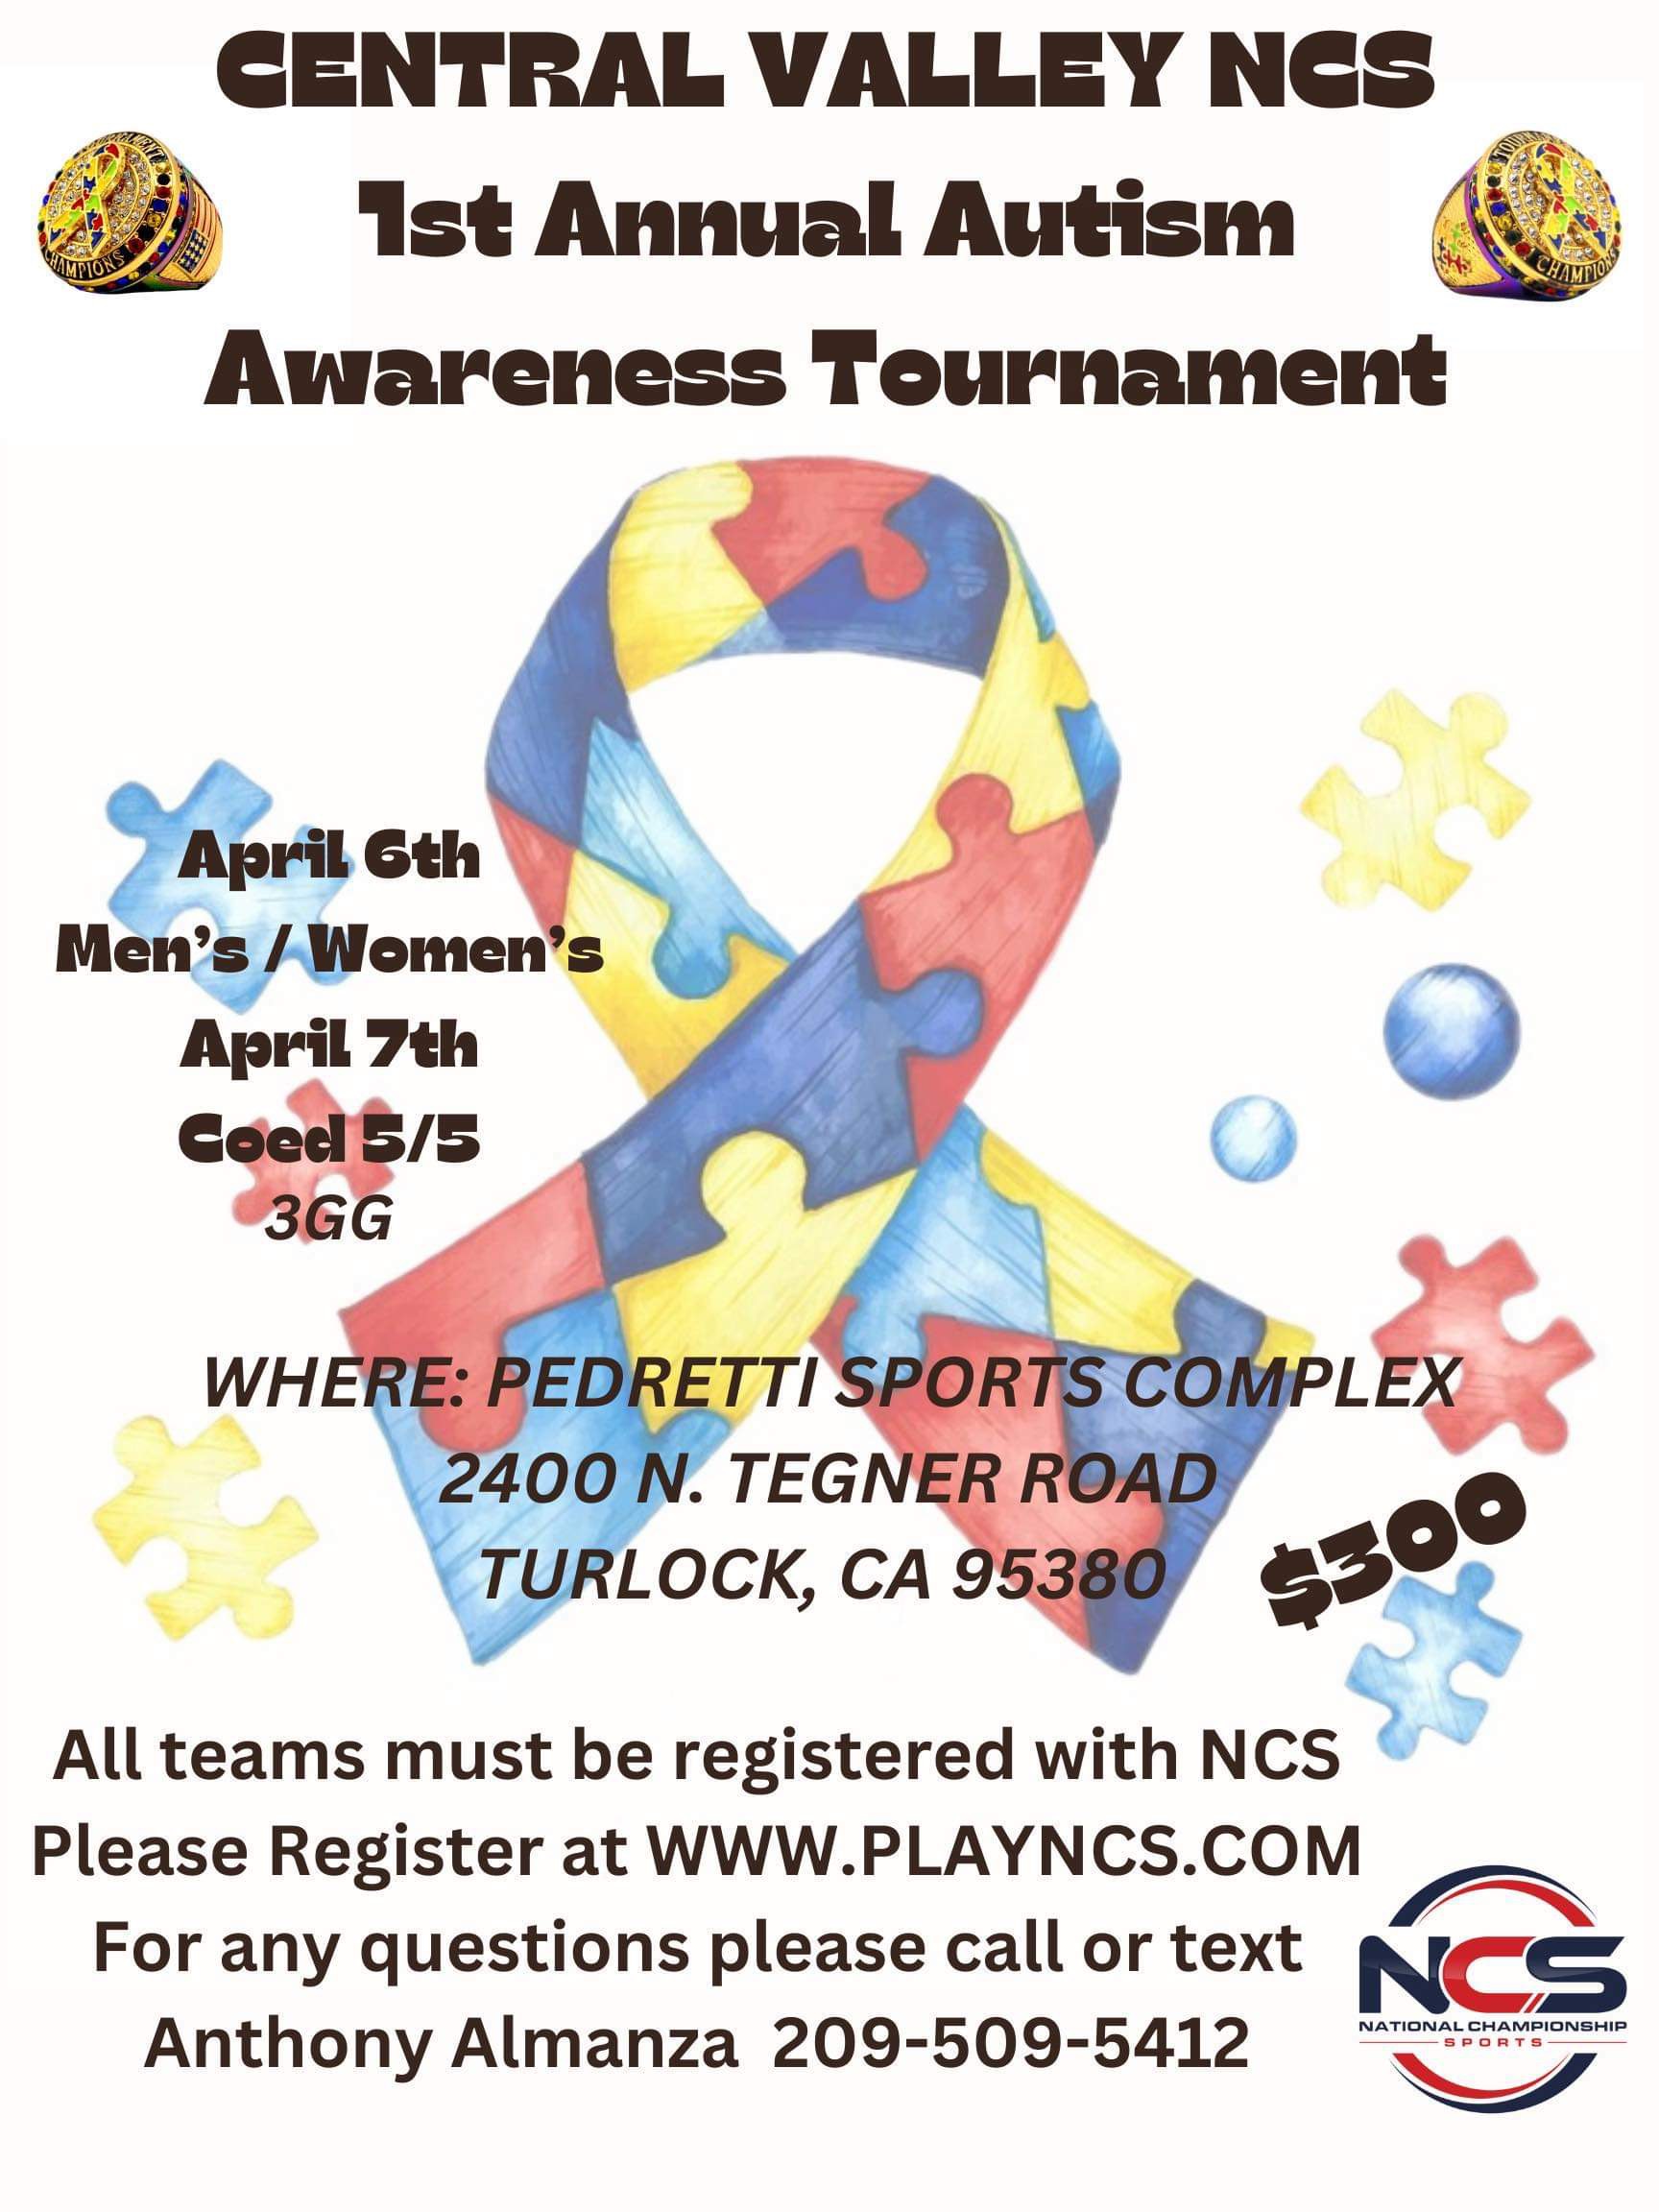 CENTRAL VALLEY NCS 1ST ANNUAL AUTISM AWARENESS TOURNAMENT Logo